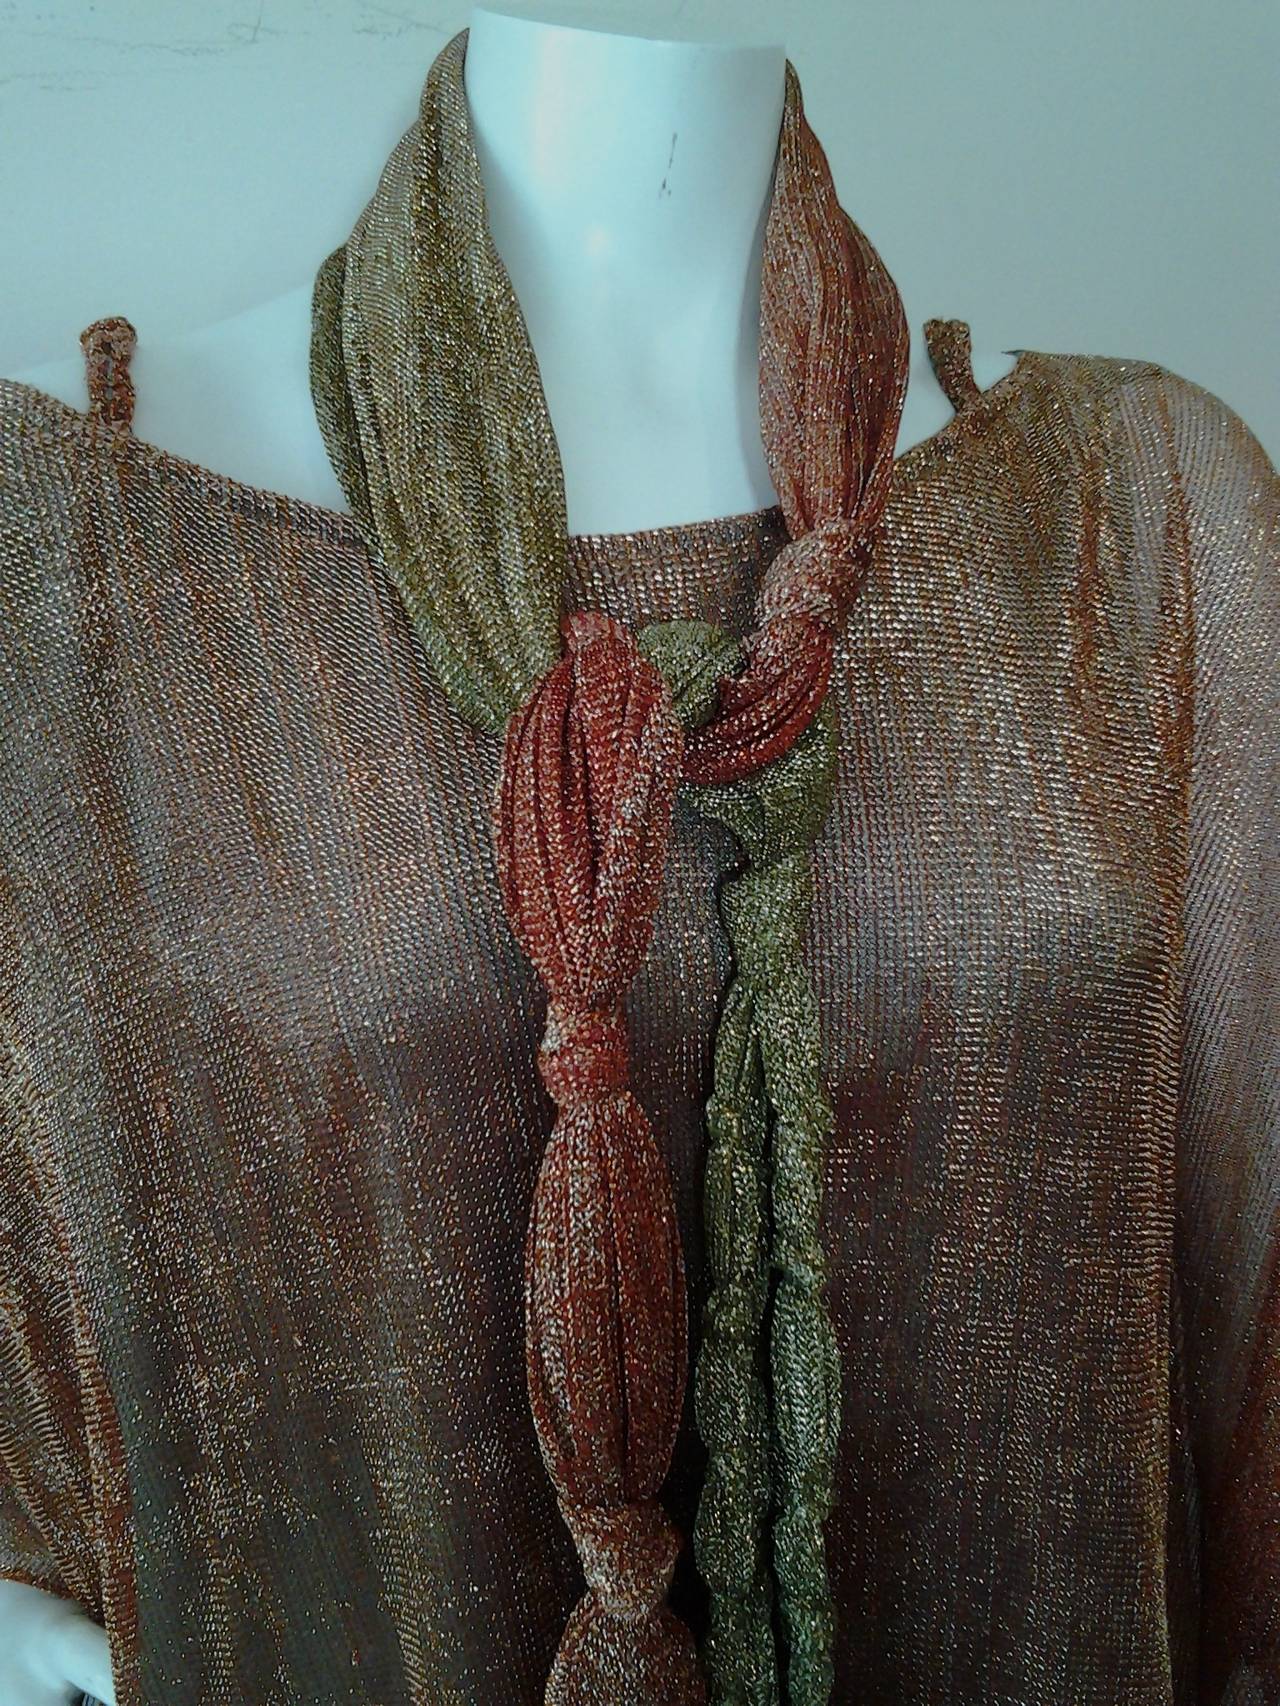 A wonderful 1970s Giorgio Sant Angelo copper to olive green lurex caftan:  Charmeuse satin lining. Braided shoulder straps and wide neckline.  Long matching beautifully knotted and fringed belt.